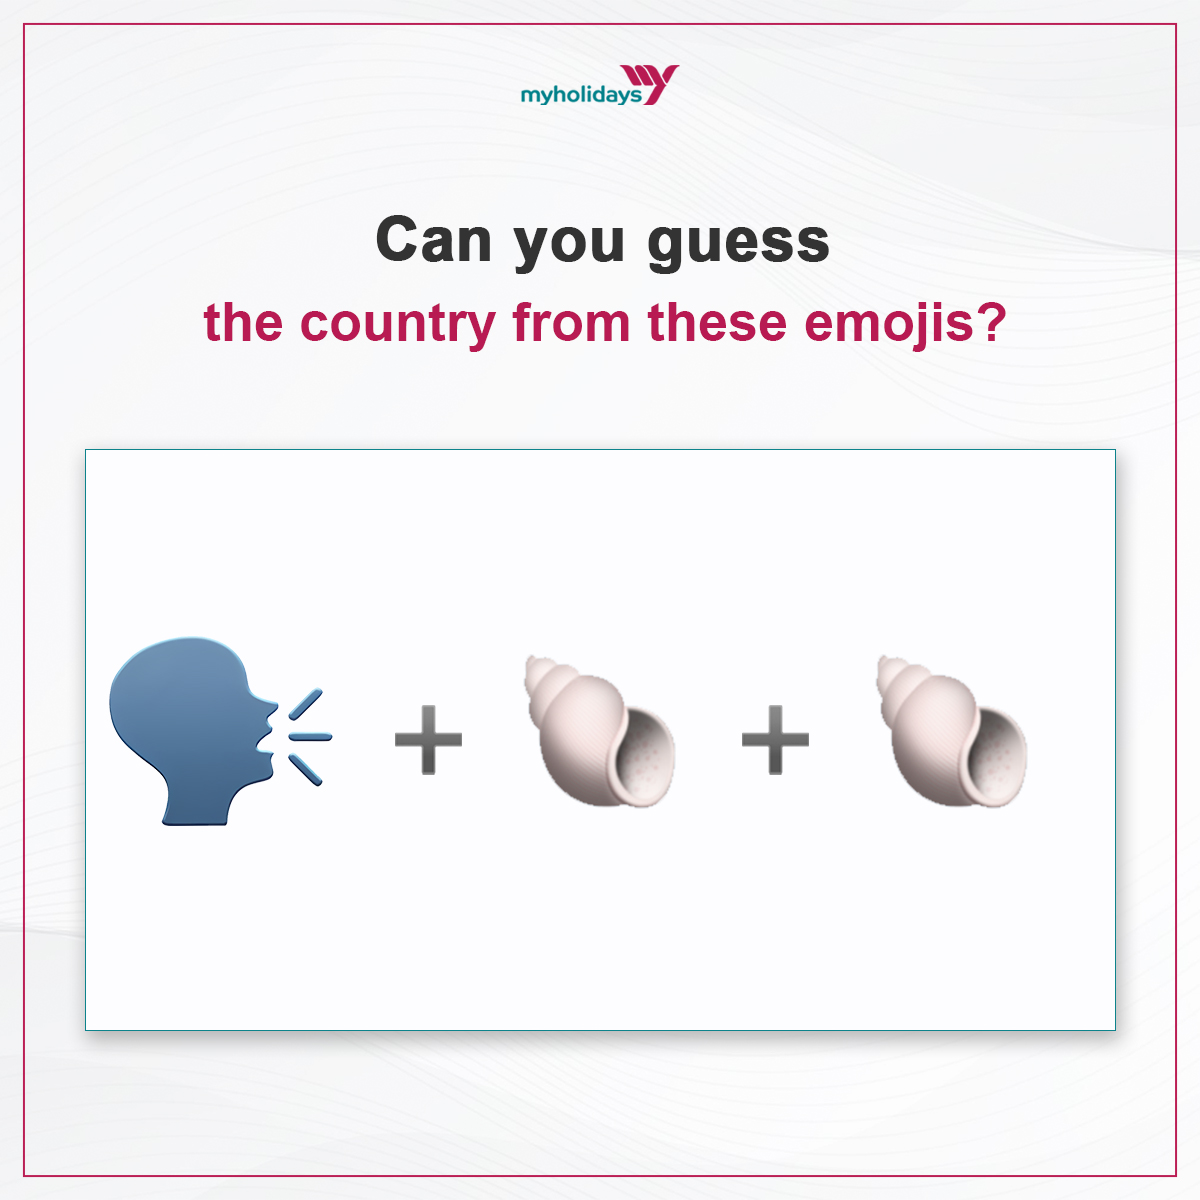 Here’s a hint, it's a country with several iconic islands in East Africa. Write the answer in the comment section. 

#myholidays #emojichallenge #emojigame #SolveThePuzzle #GuessChallenge #followformore